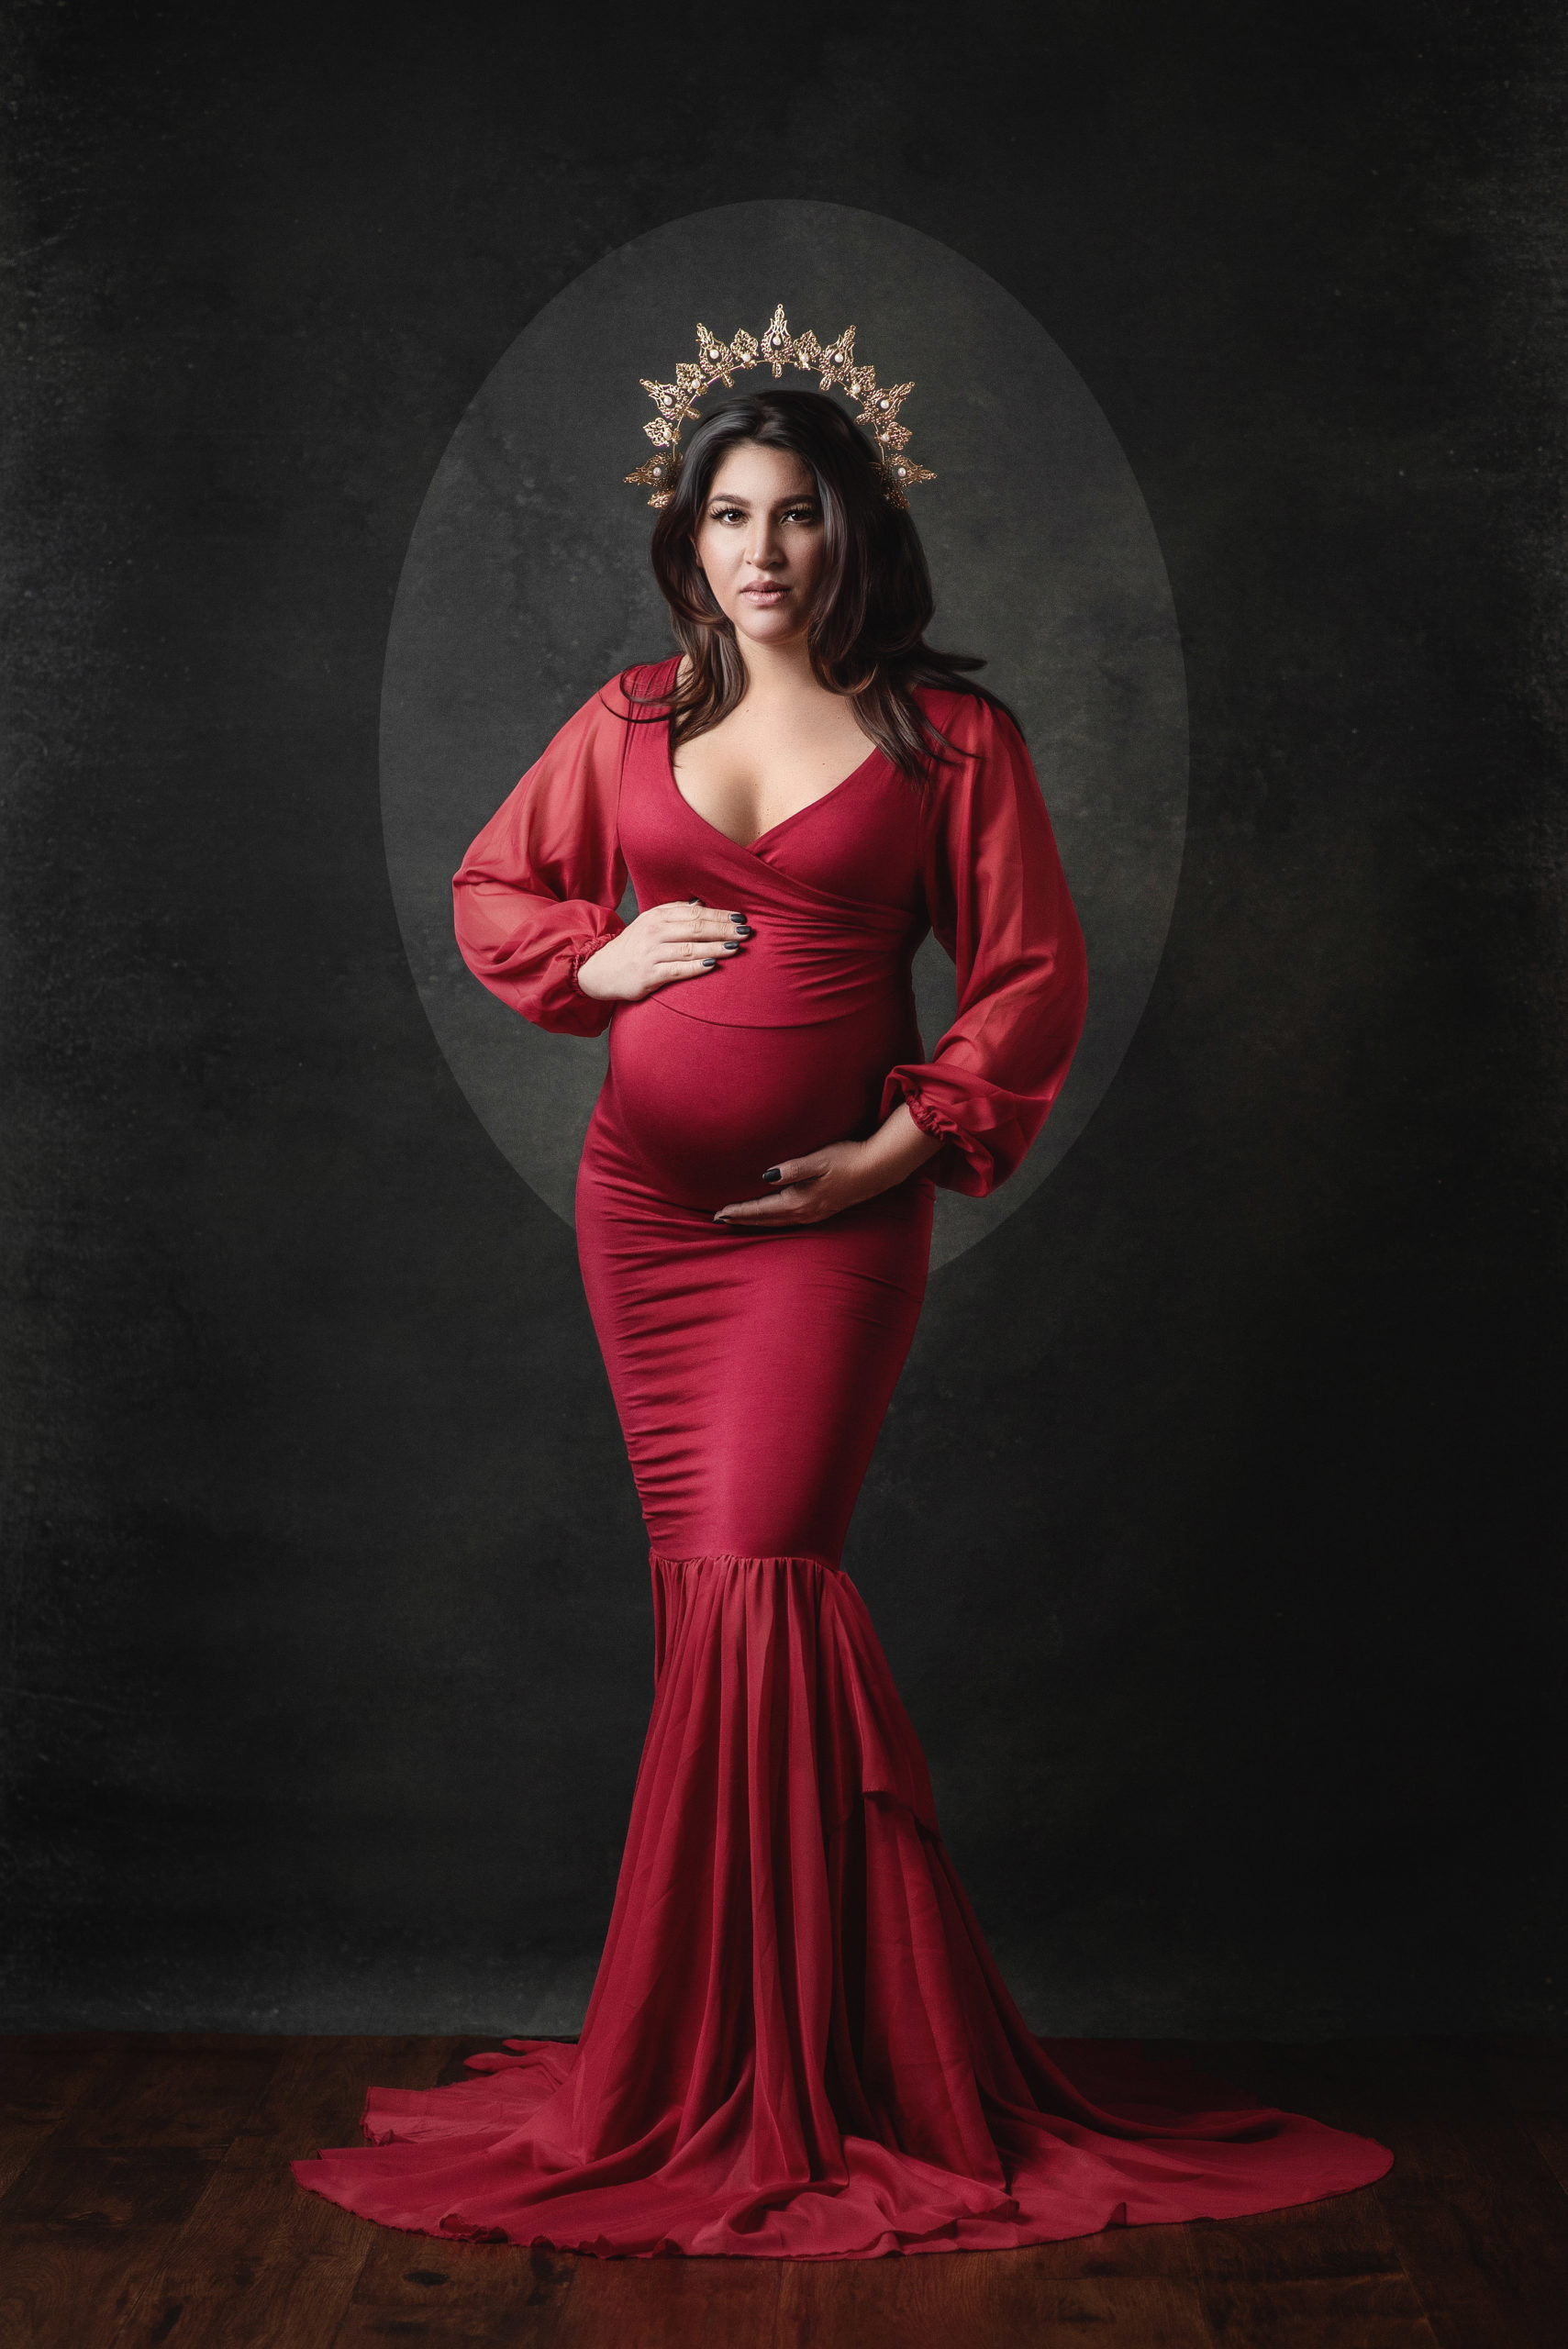 You are currently viewing Goddess Maternity at Neal Urban Portraits